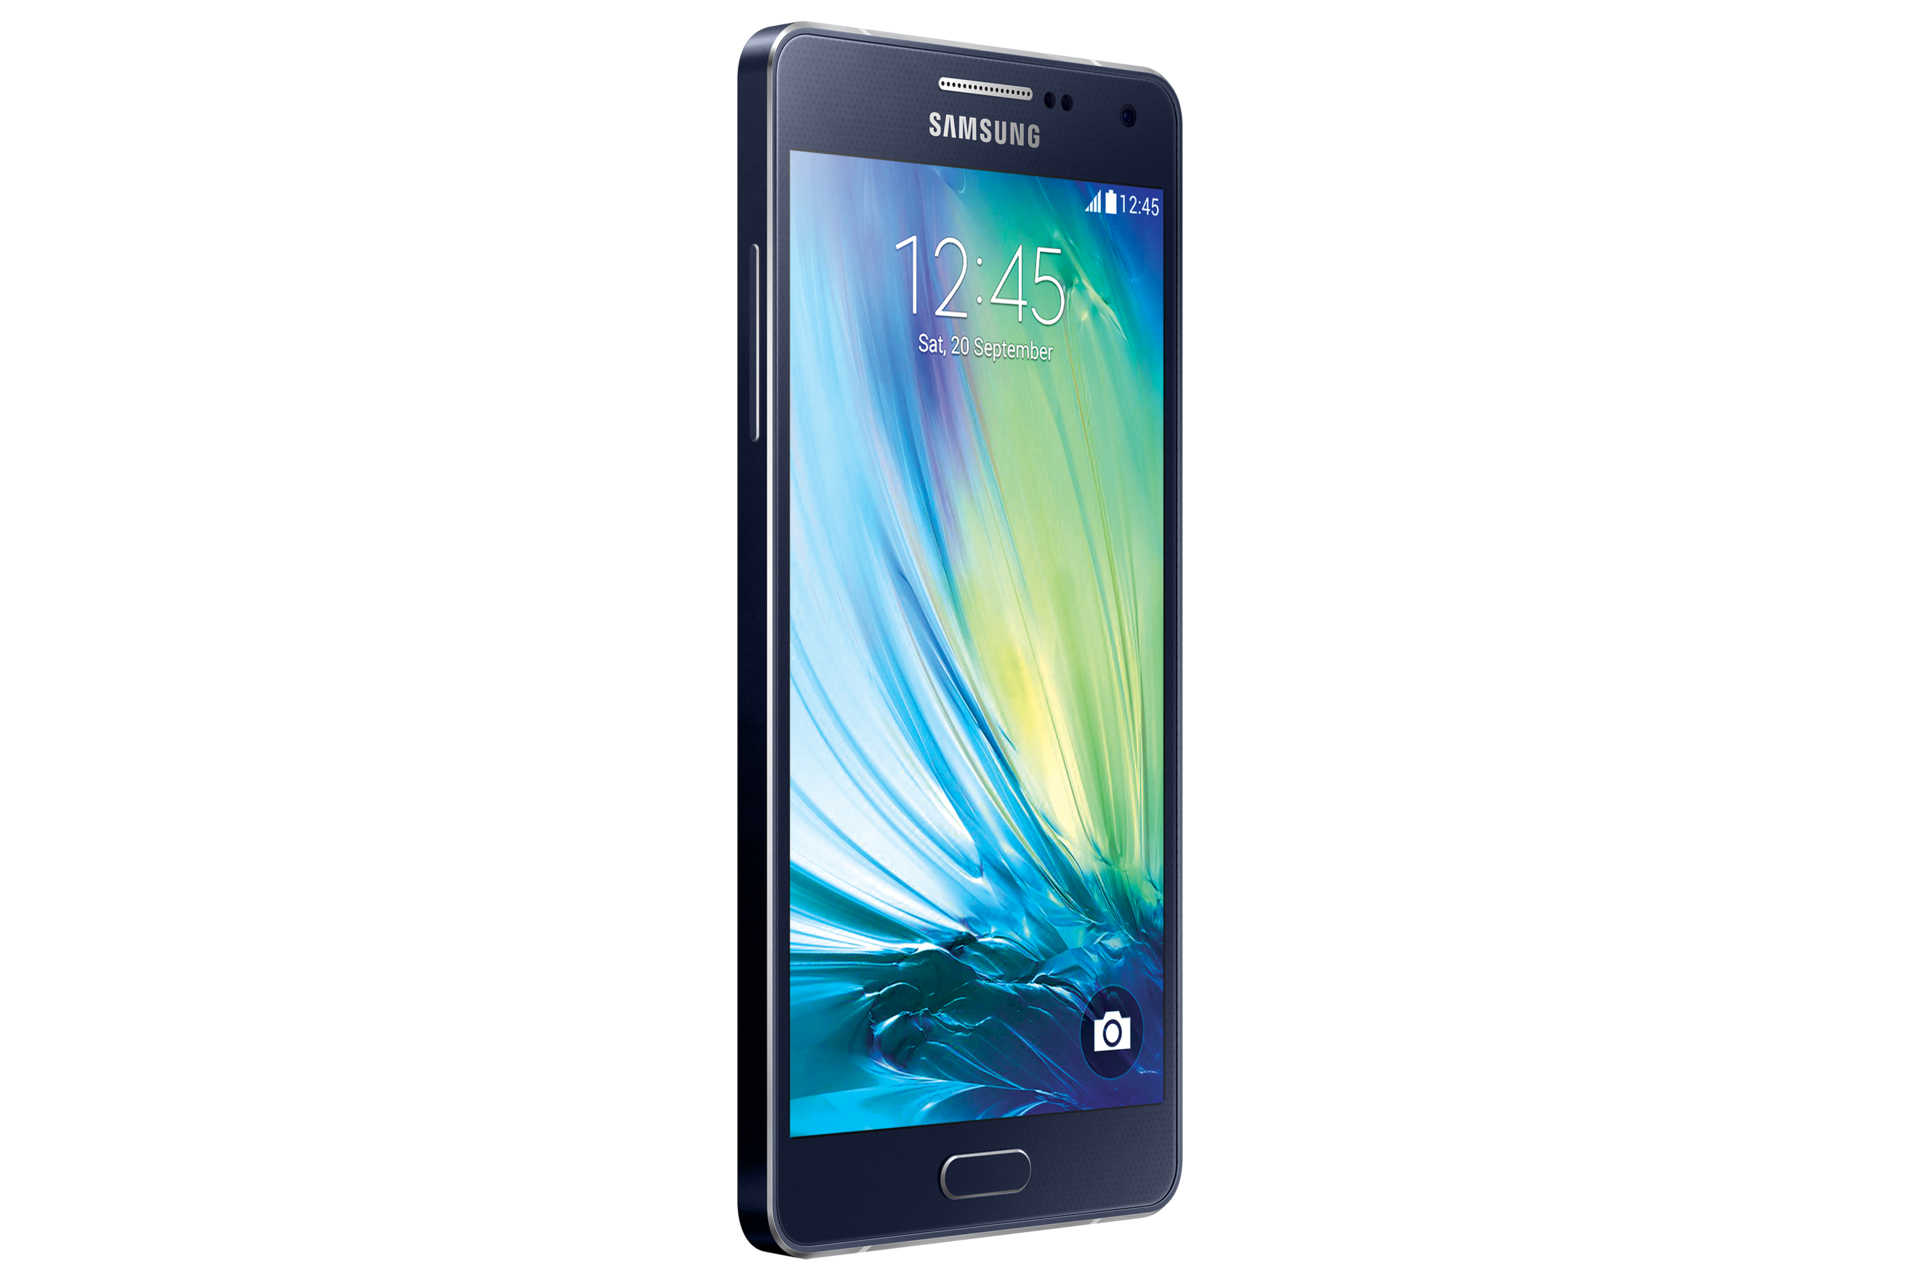 Samsung Galaxy A5 Price India, Galaxy A5 Metal 5 Inch Smartphone Features, Specs